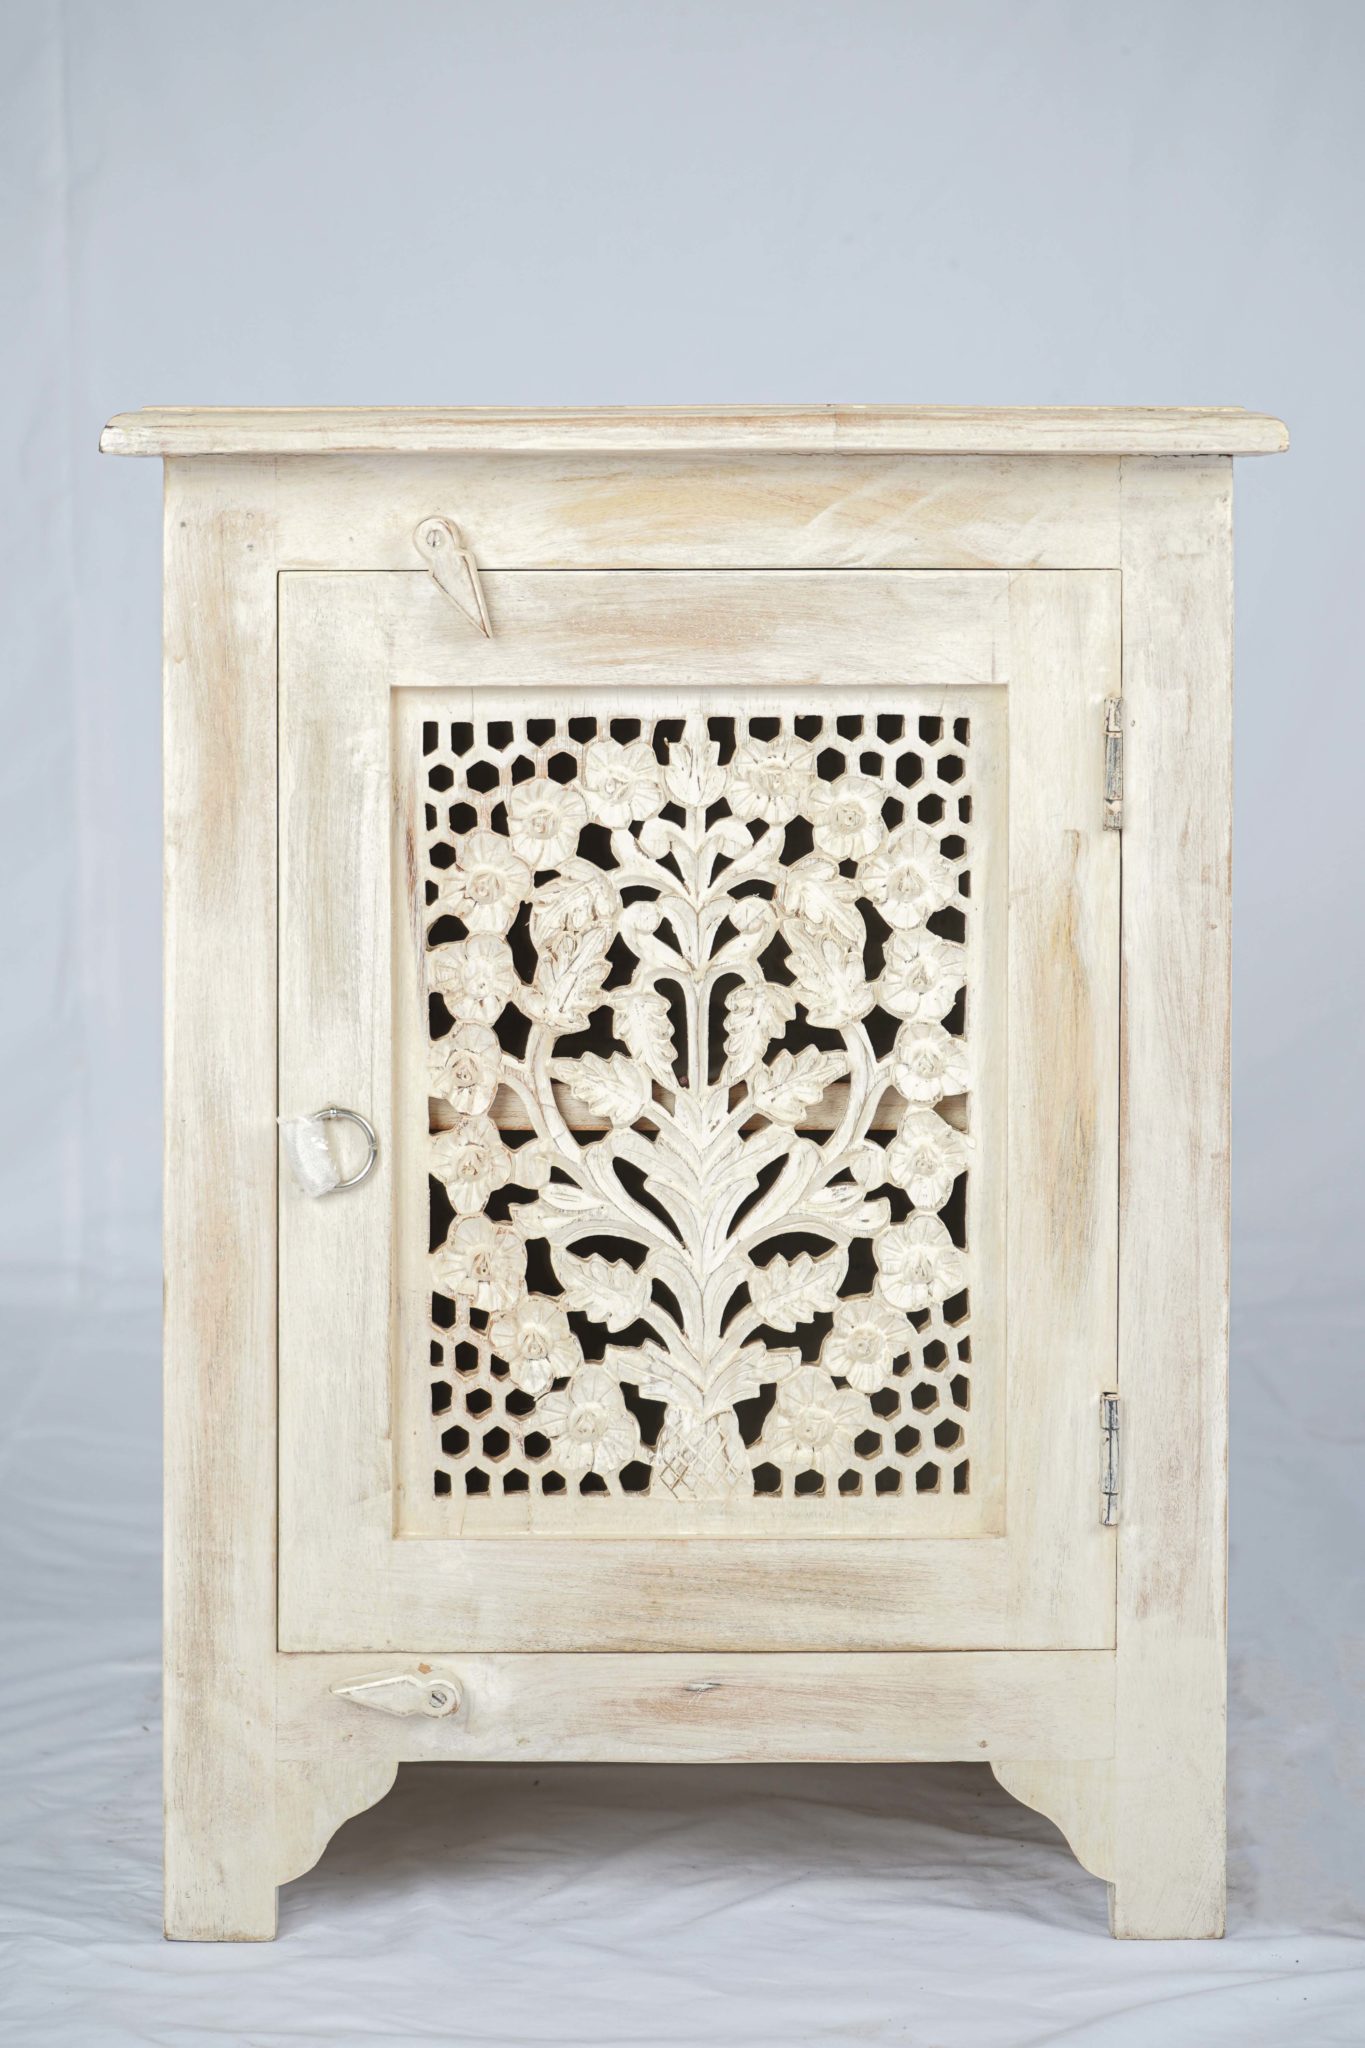 Clearance Sale: Wooden carved night stand, Indian design - Siam Sawadee